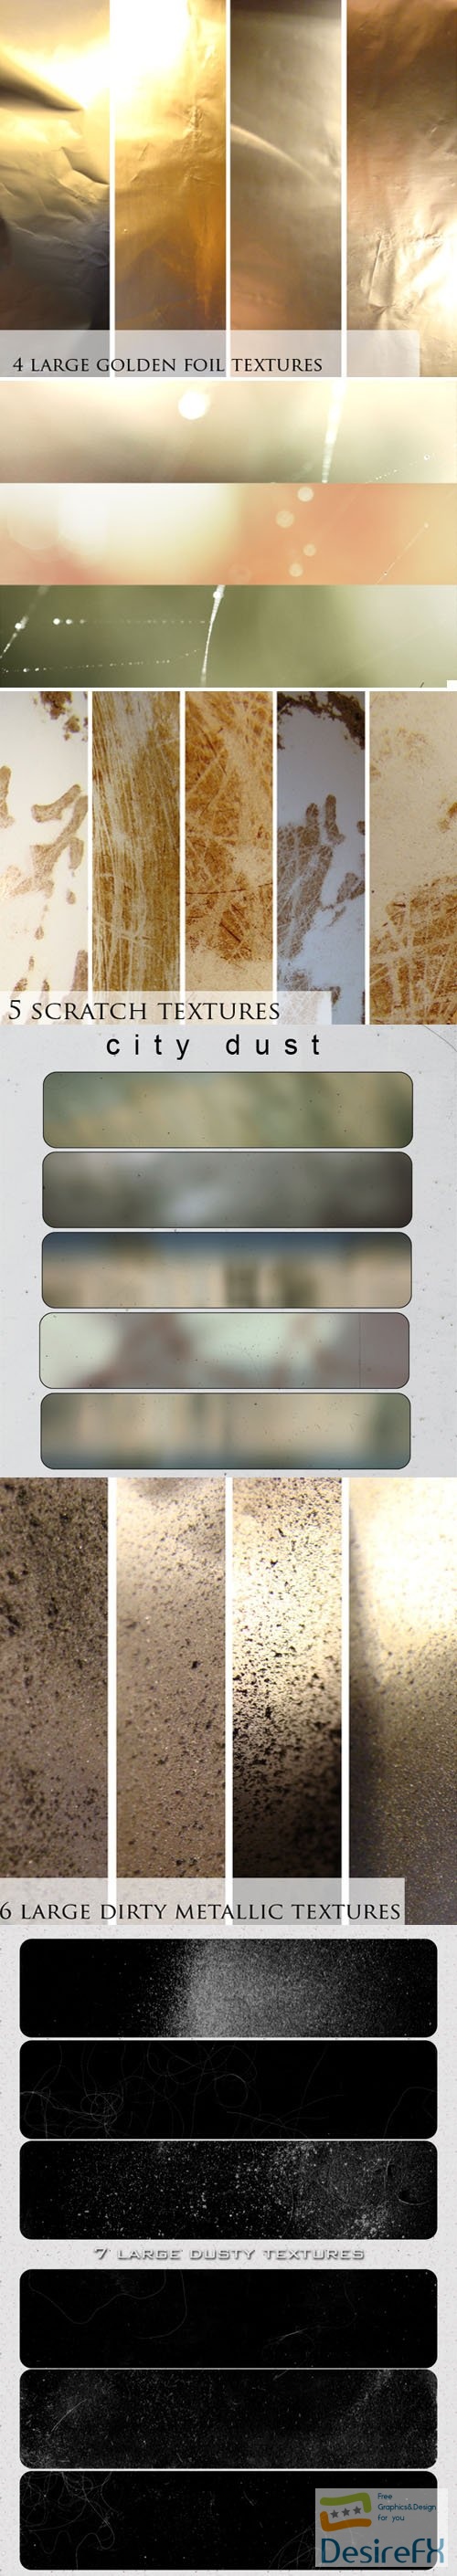 70+ Awesome Pack of Textures &amp; Backgrounds